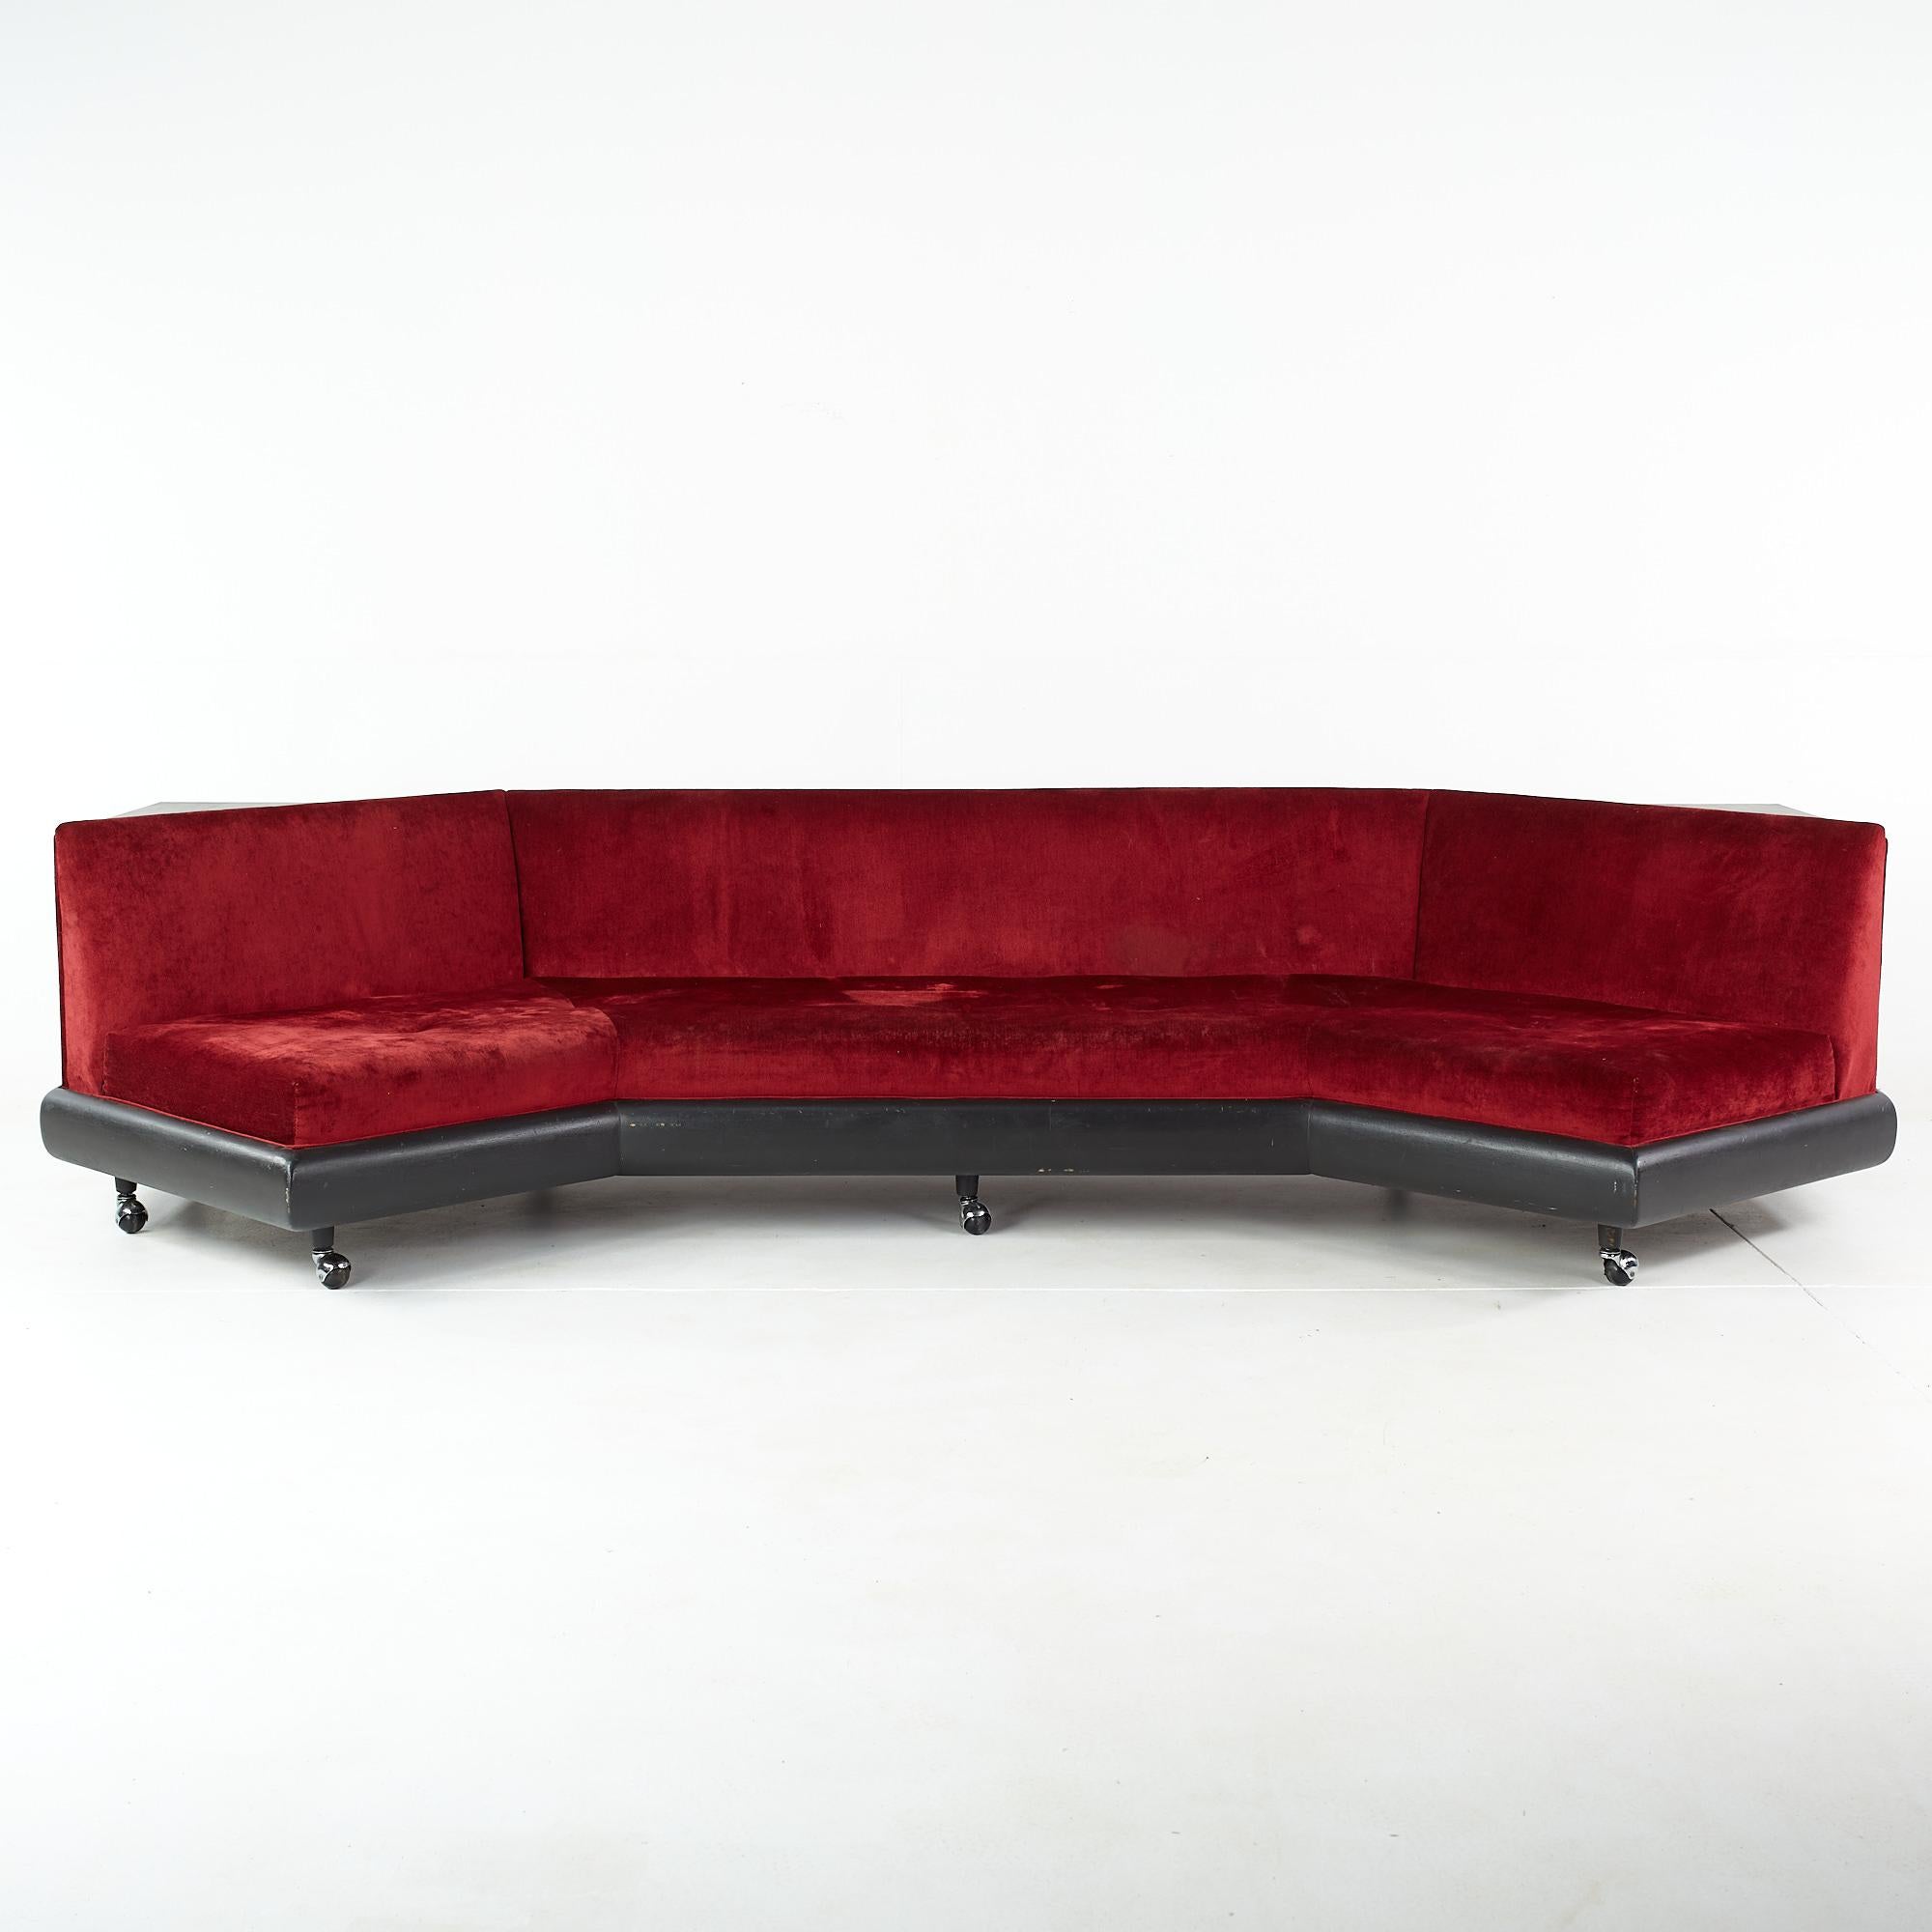 Adrian Pearsall for Craft Associates mid century ebonized boomerang sofa

This sofa measures: 123 wide x 53 deep x 28 inches high, with a seat height of 15 and chair clearance of 15 inches

All pieces of furniture can be had in what we call